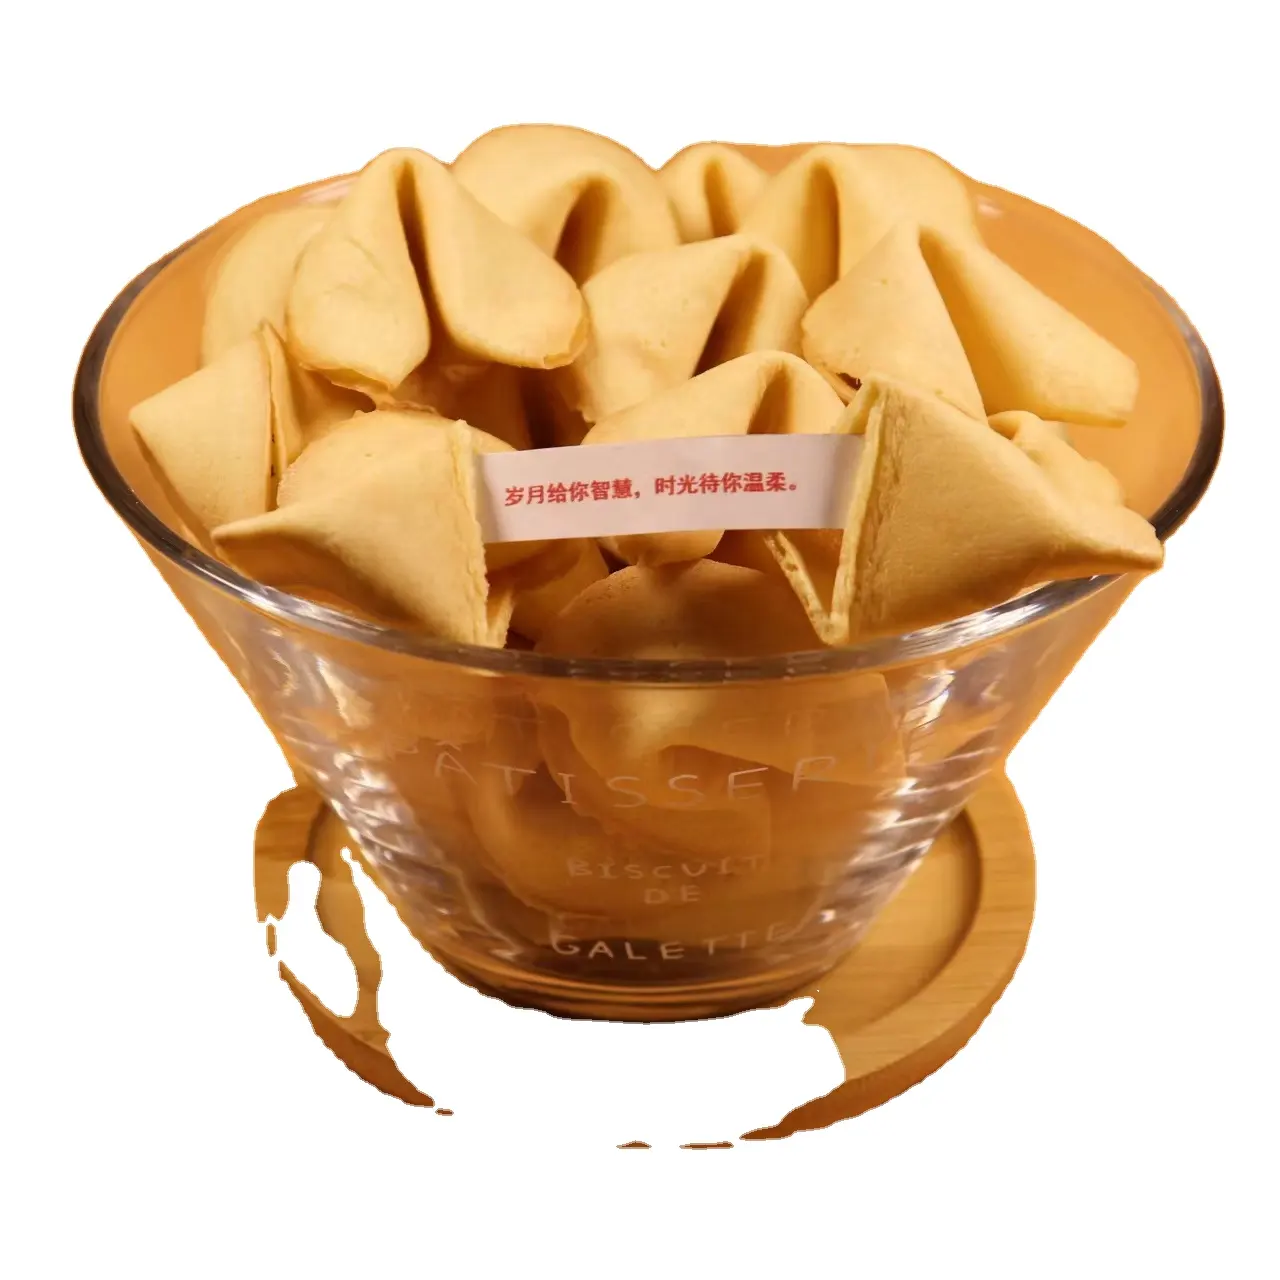 wholesale lucky fortune cookies